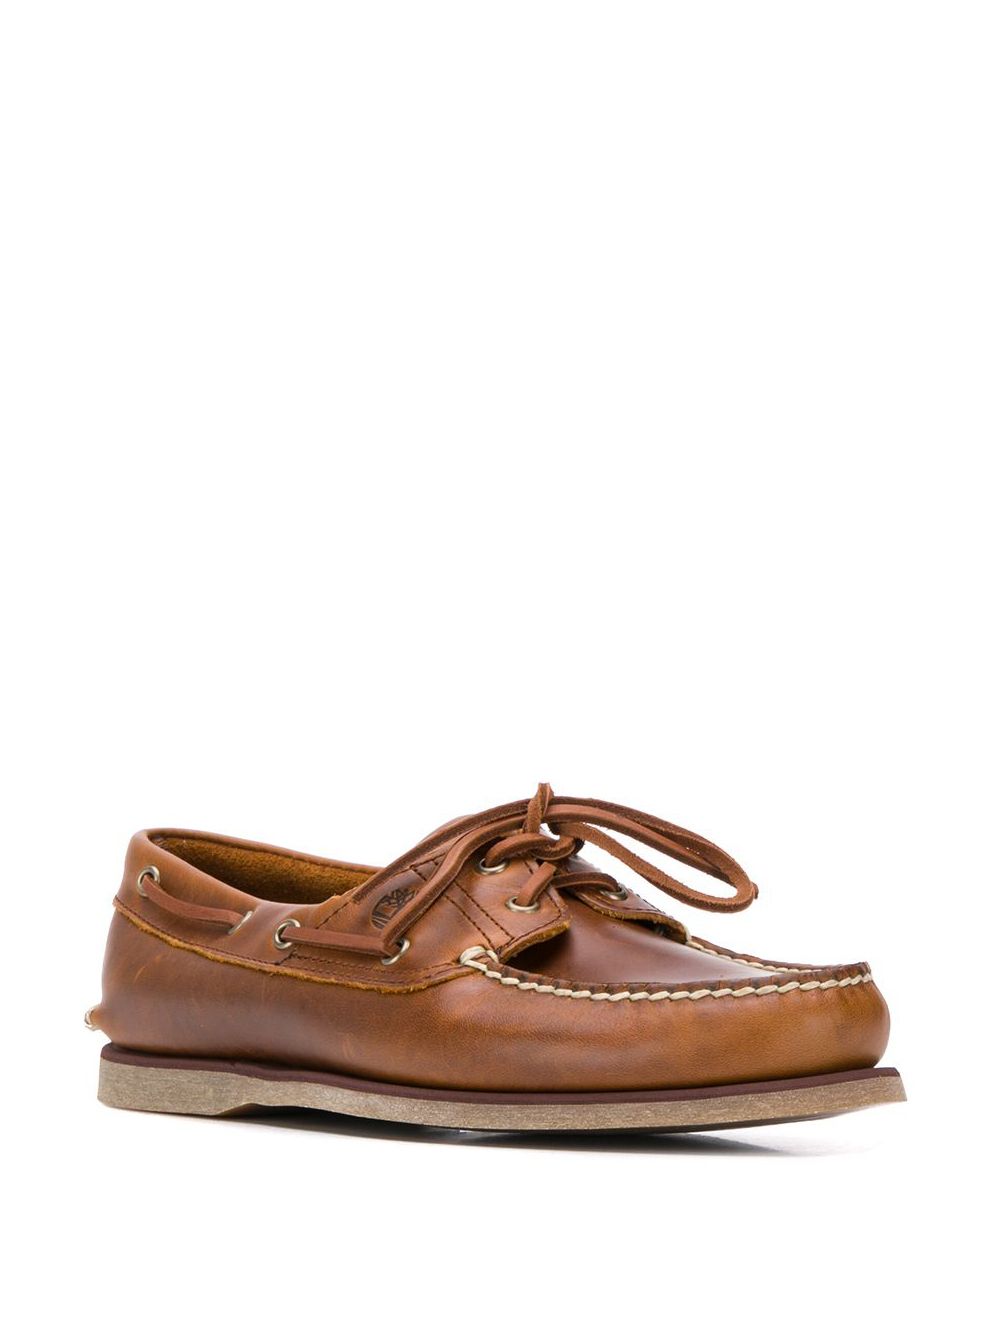 Brown leather lace-up boat shoes